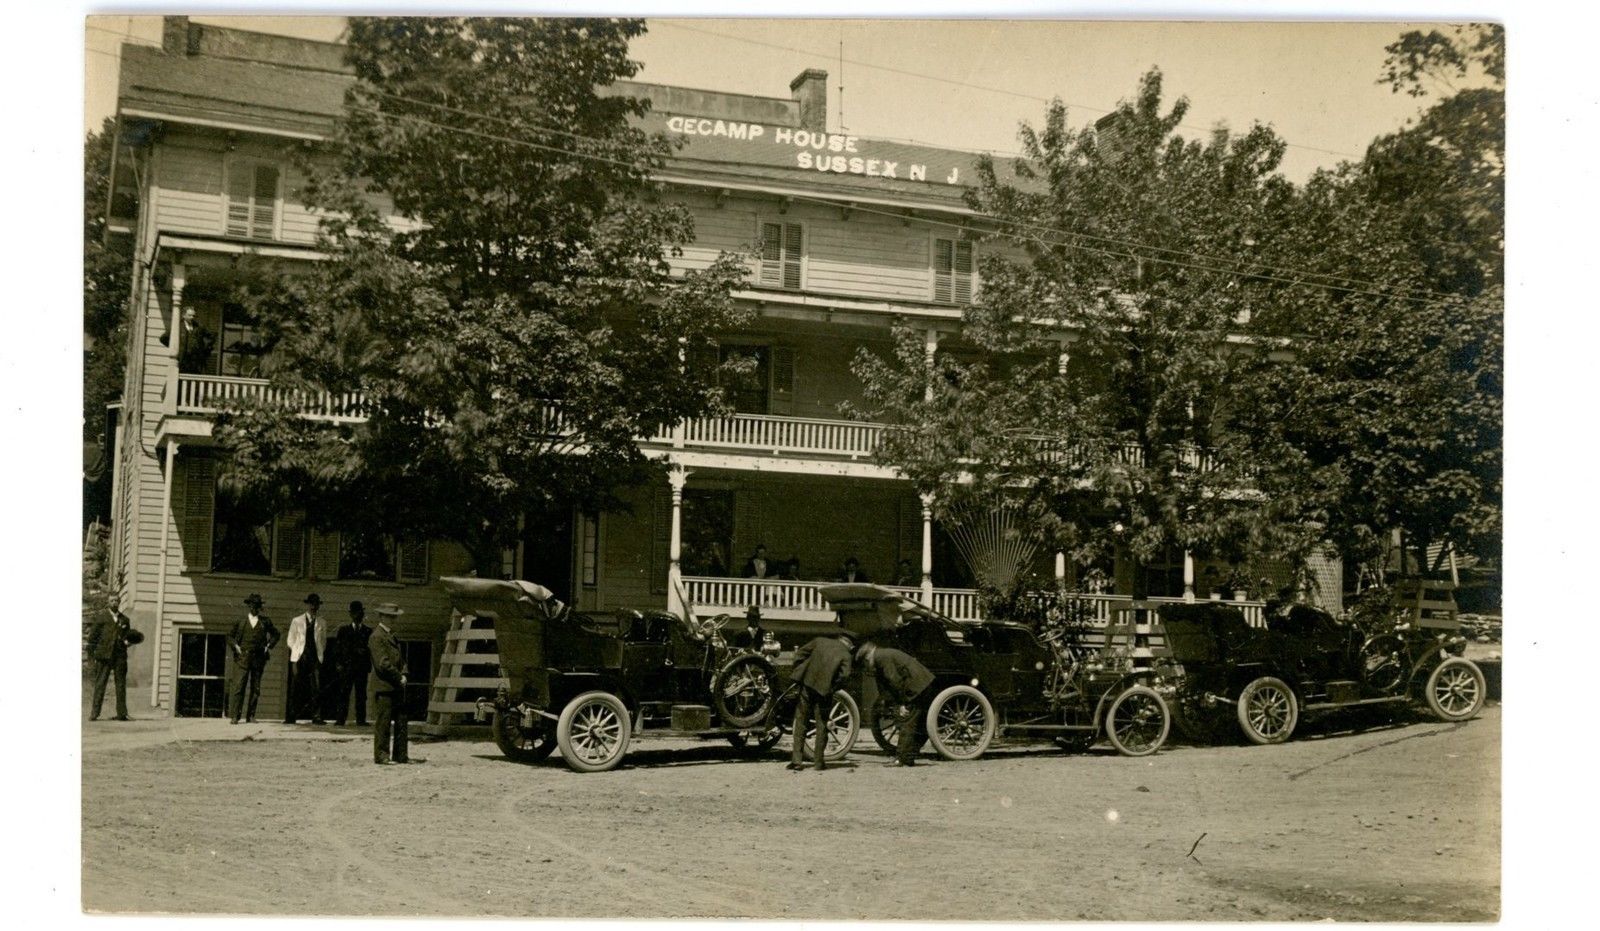 Sussex - DeCamp Hotel - c 1910s or so